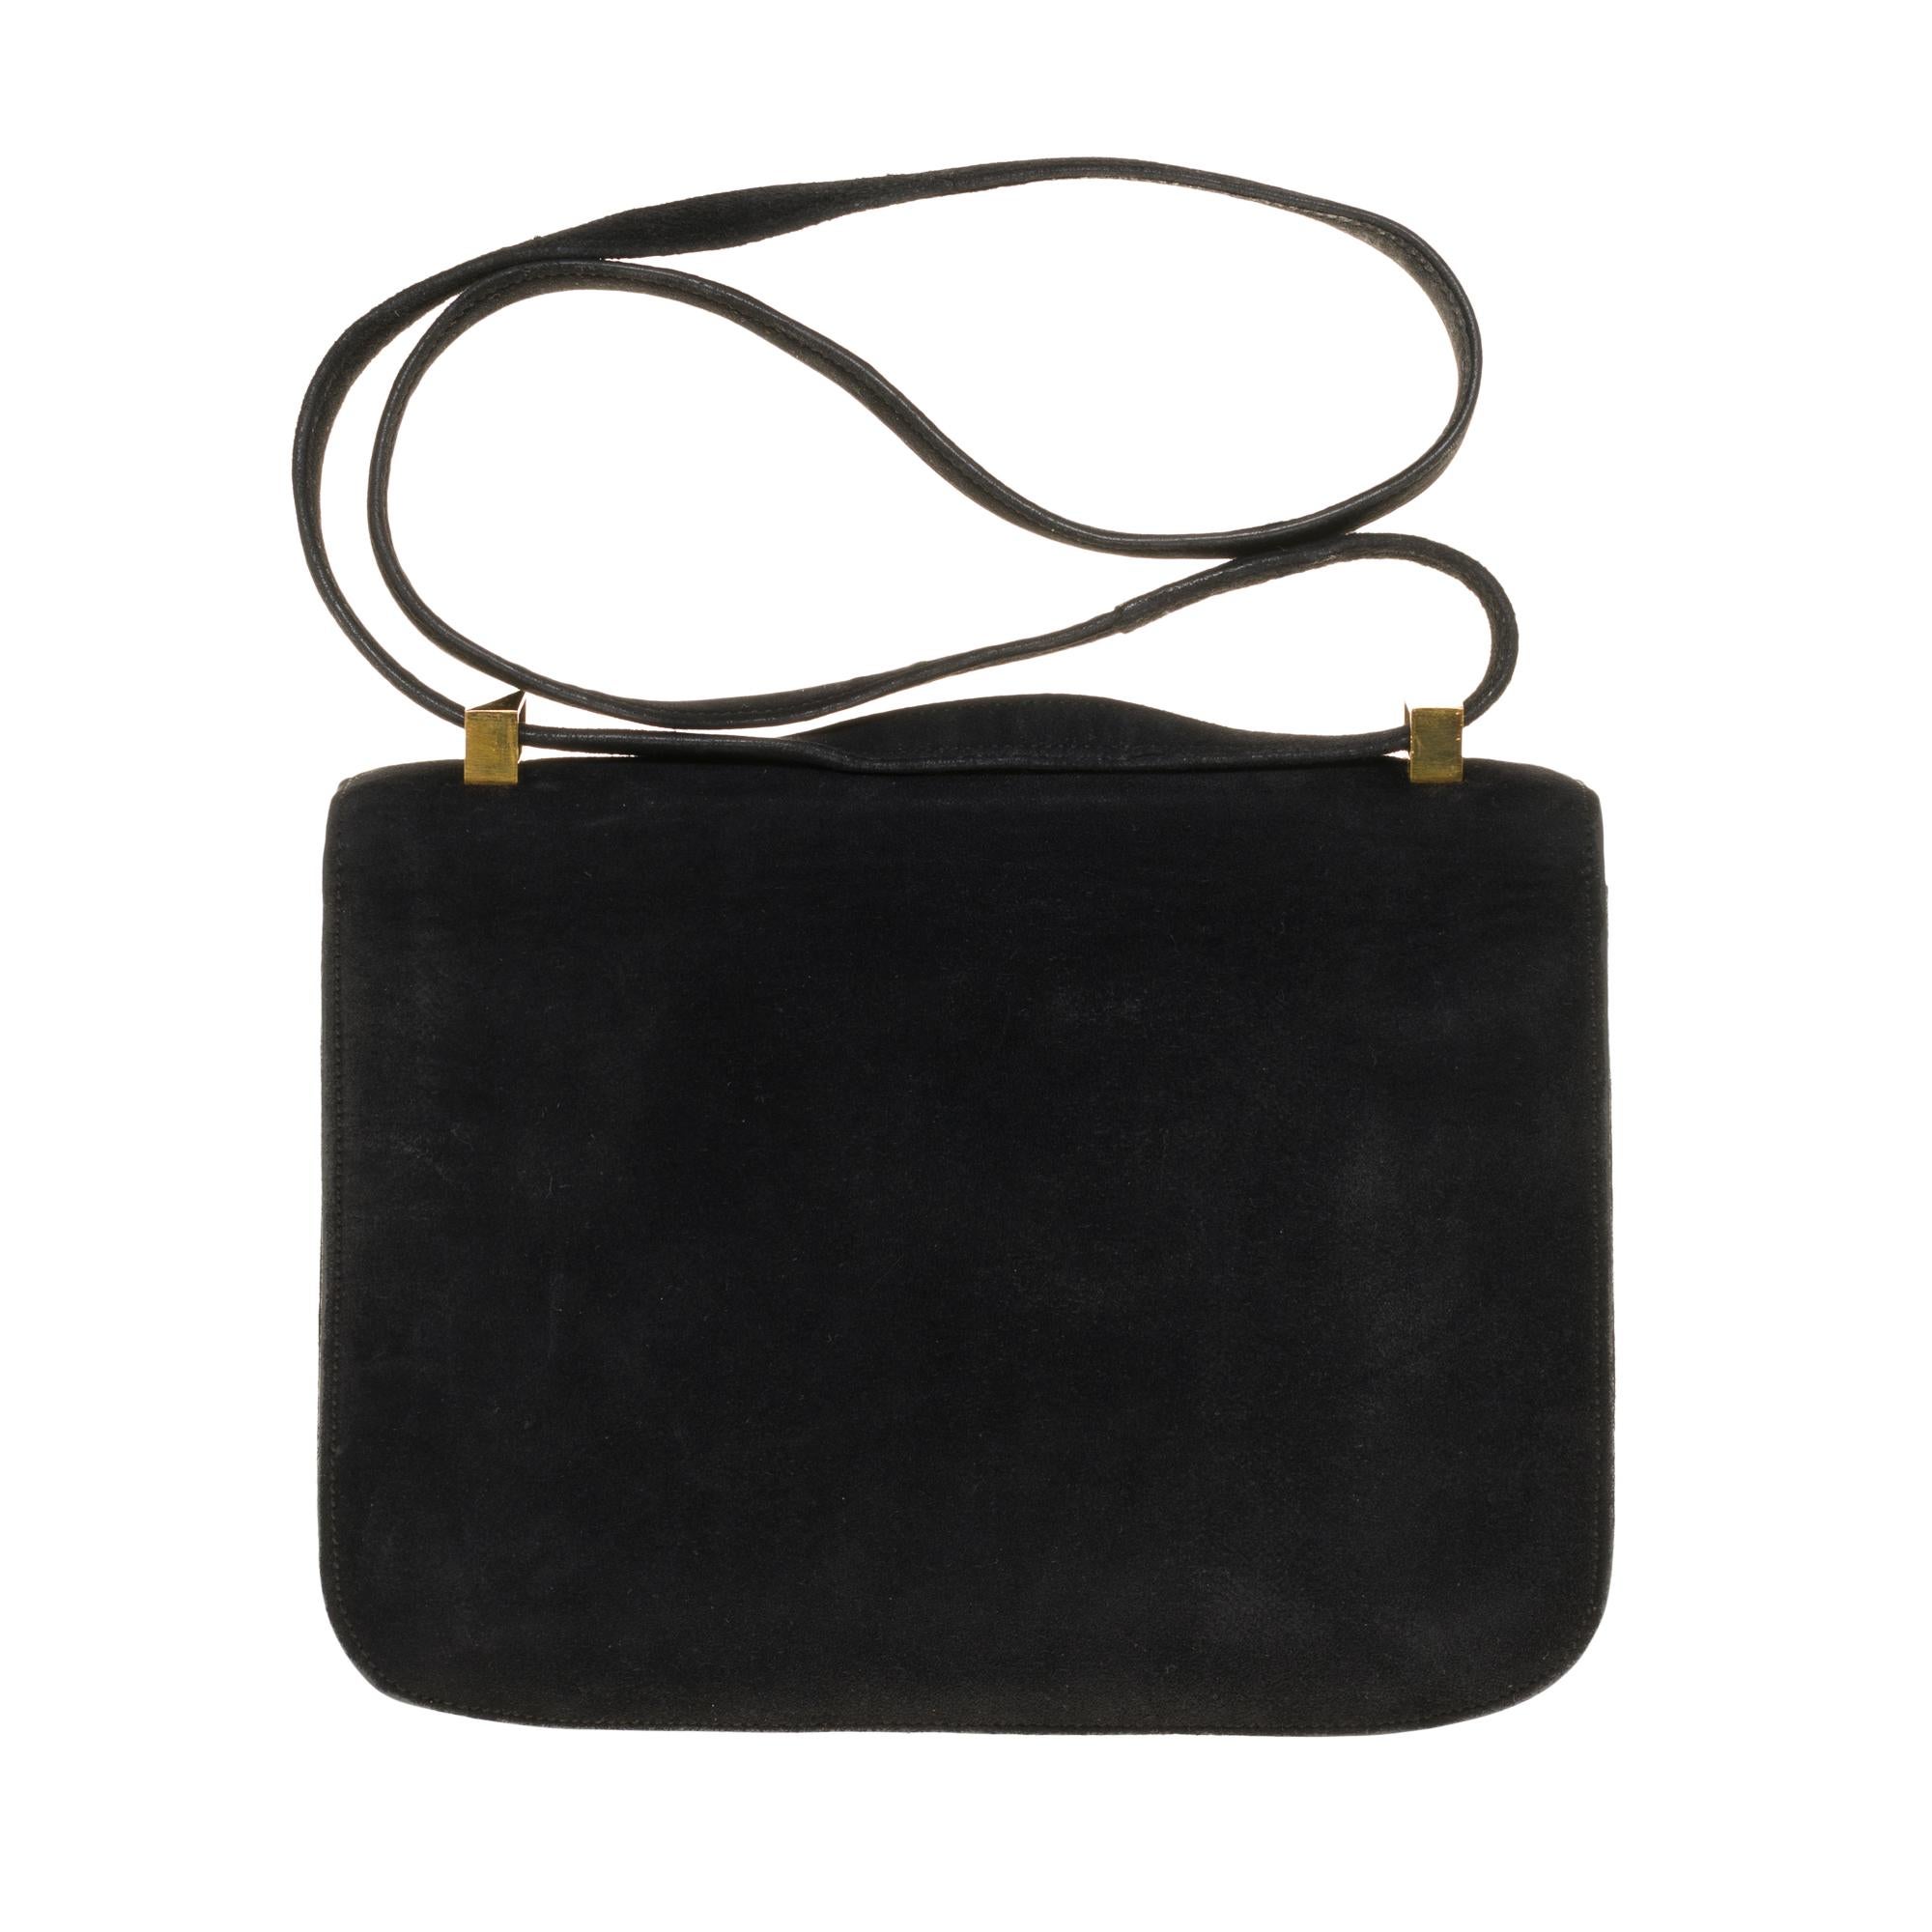 
Rare & Splendid Handbag Hermes Constance 23 cm in black suede, gold metal hardware, handle transformable into black suede allowing a hand or shoulder support.

Closure marked H on flap.
Lining in black leather, a zipped pocket, a patch